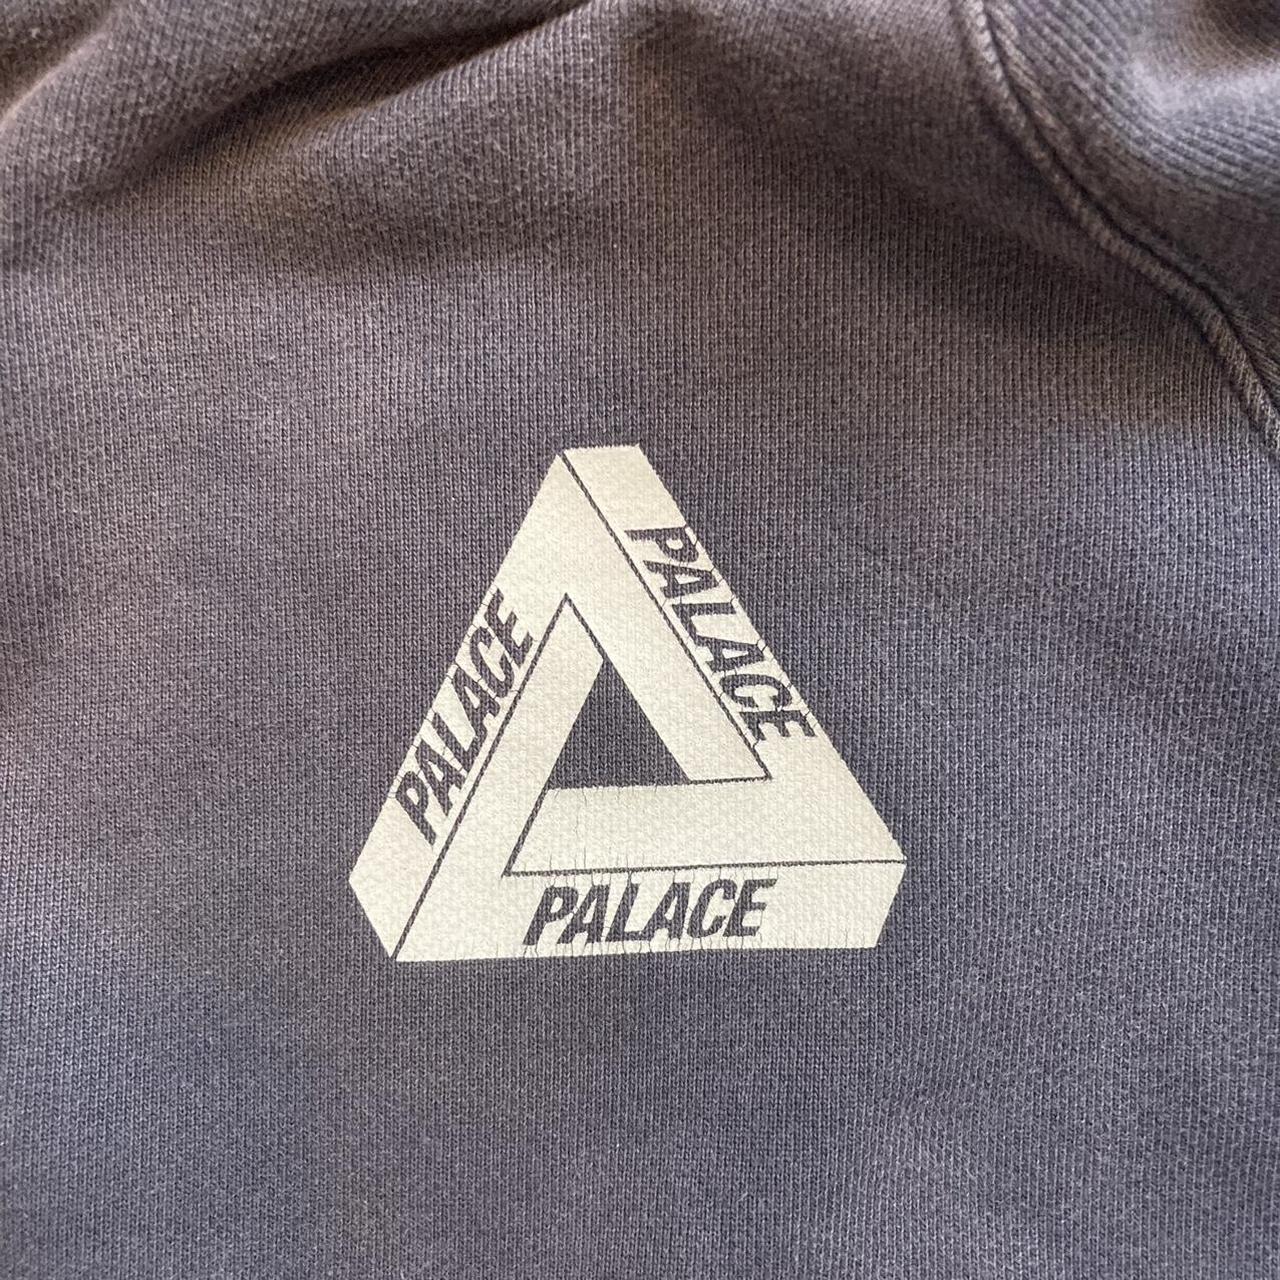 Vintage Palace skate hoodie. Thick and warm. Great... - Depop